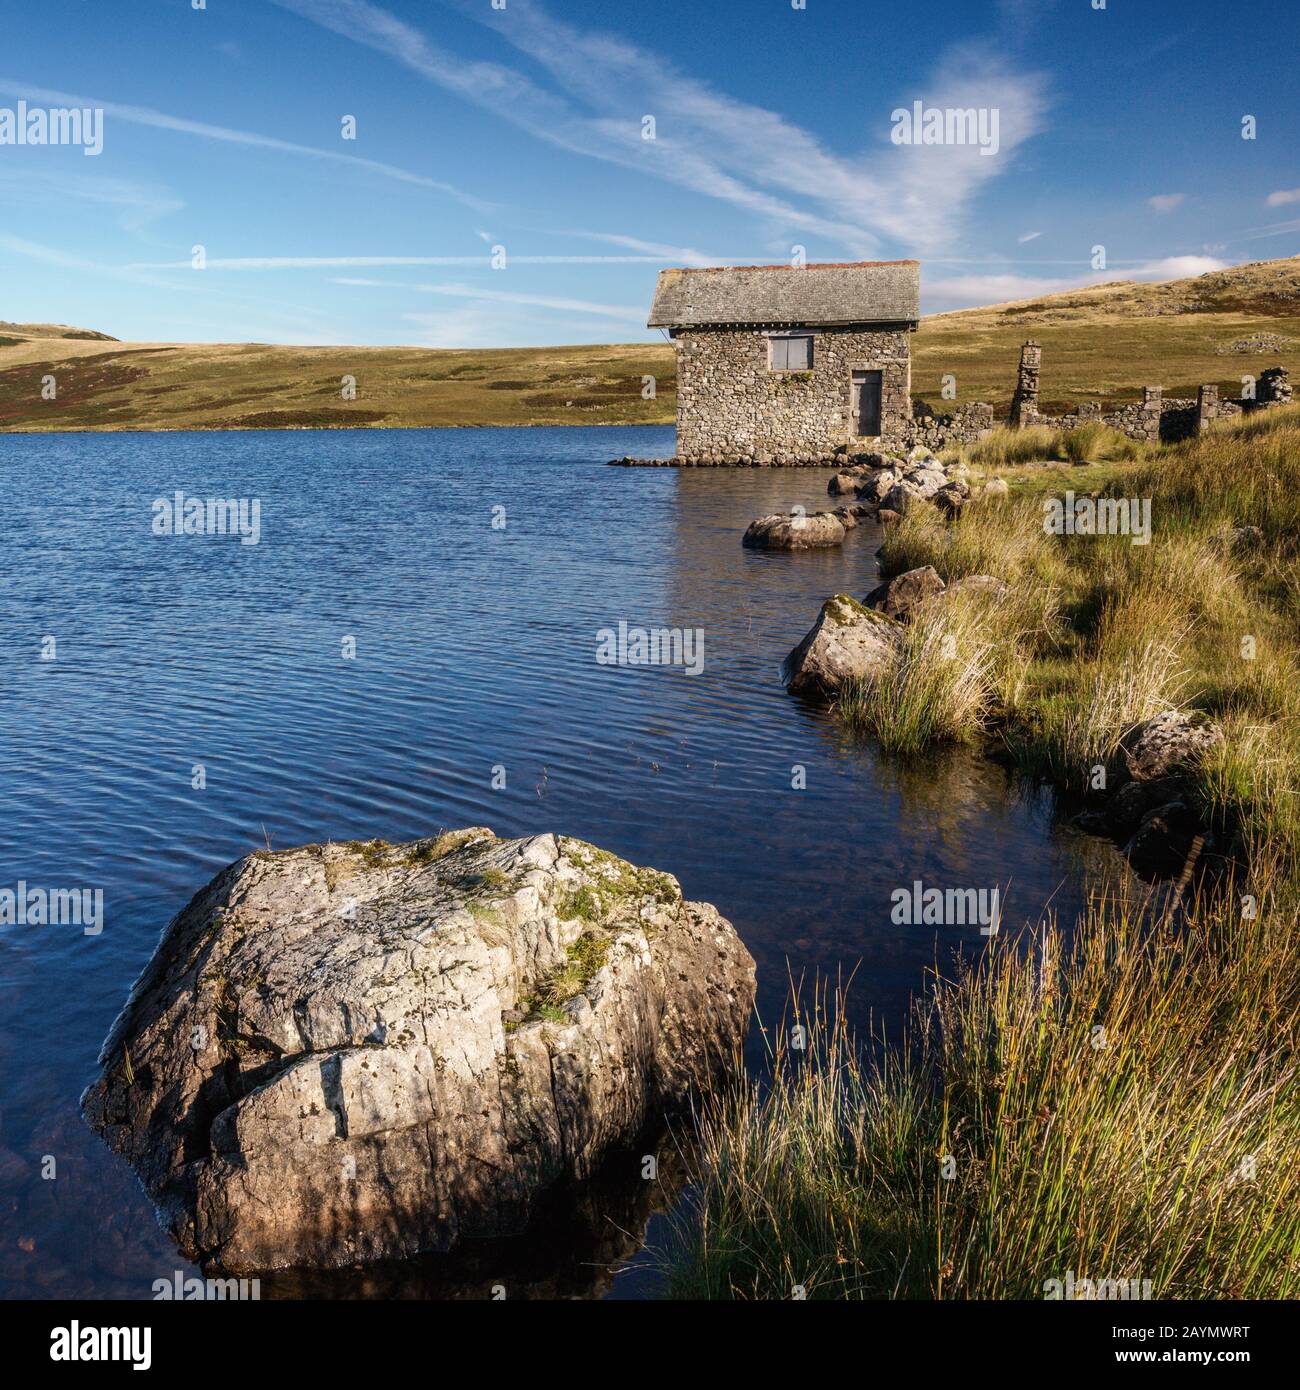 The disused old stone boathouse on the shores of Devoke Water, Lake District National Park, Cumbria, England, Uk Stock Photo